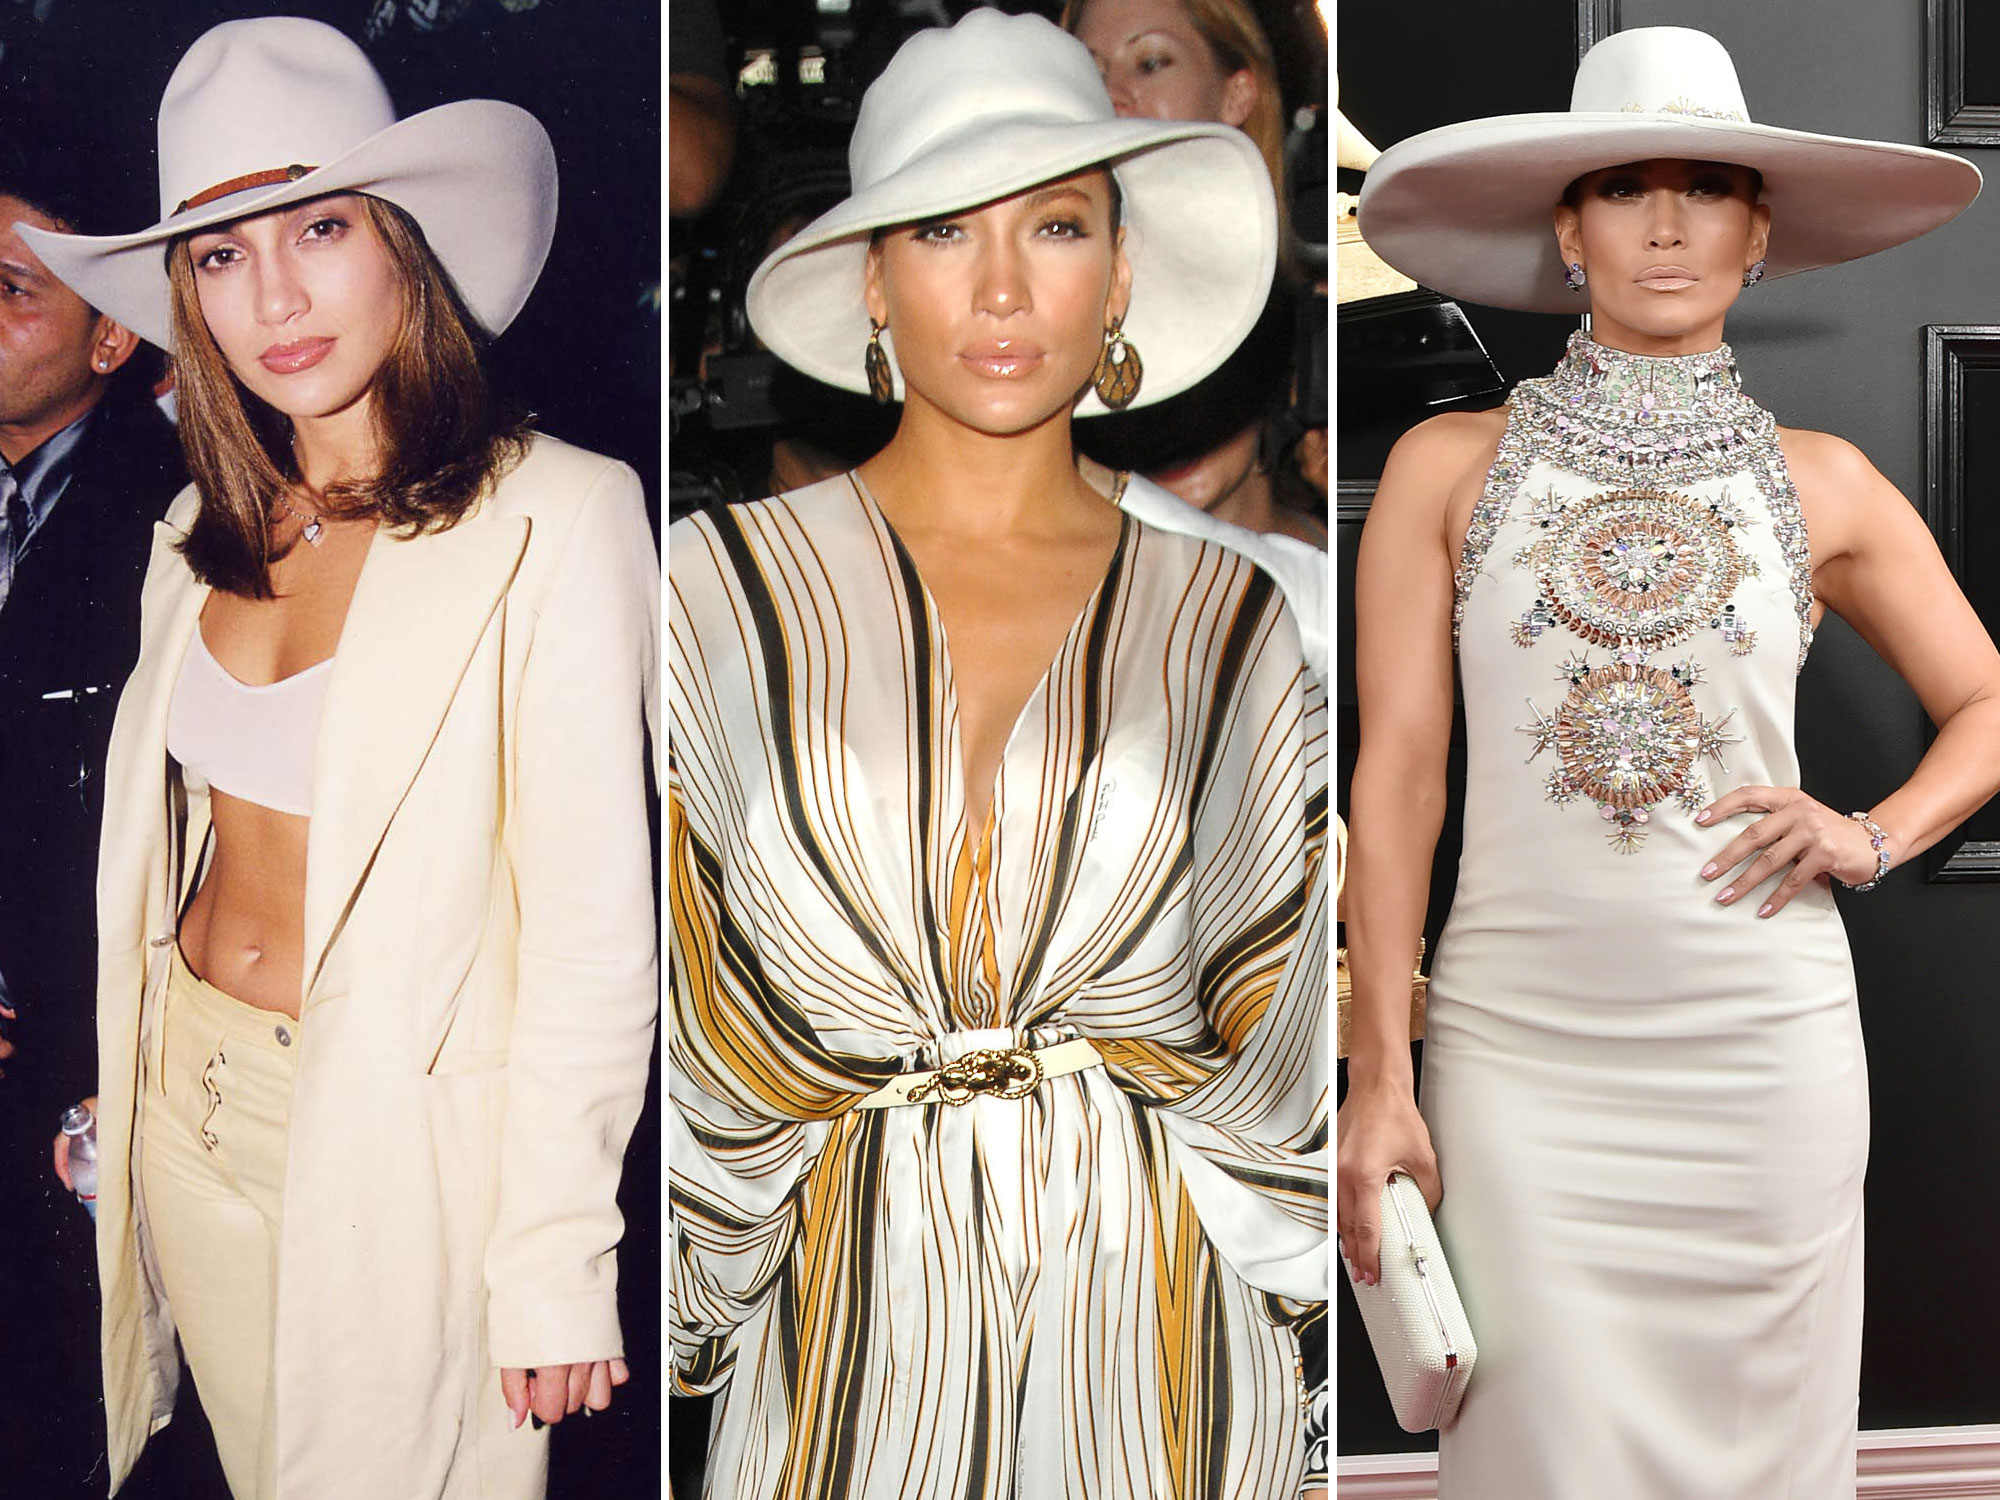 Cardi and five other female top singers in the fashion business, Jennifer Lopez - J.Lo